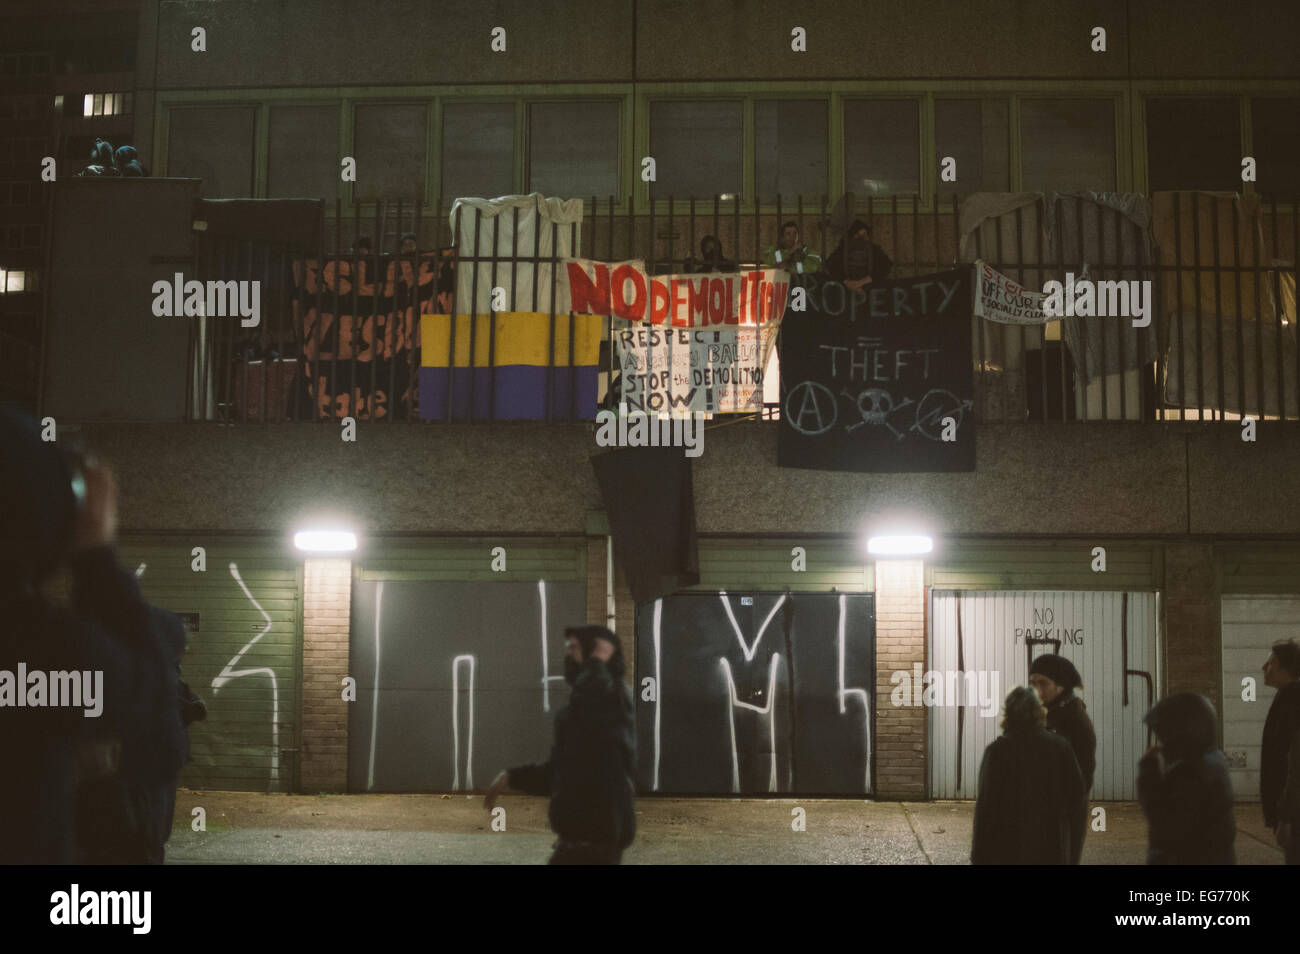 London, UK. 17th February, 2015. The eviction at Aylesbury Estate, 77 – 105 Chartridge, Westmoreland Road on 17th February 2015 of housing activists on one of europe's largest Estates.  Protesters gathered as police in riot gear cut down barricades and made arrests. Credit:  Richard Skinner/Alamy Live News Stock Photo